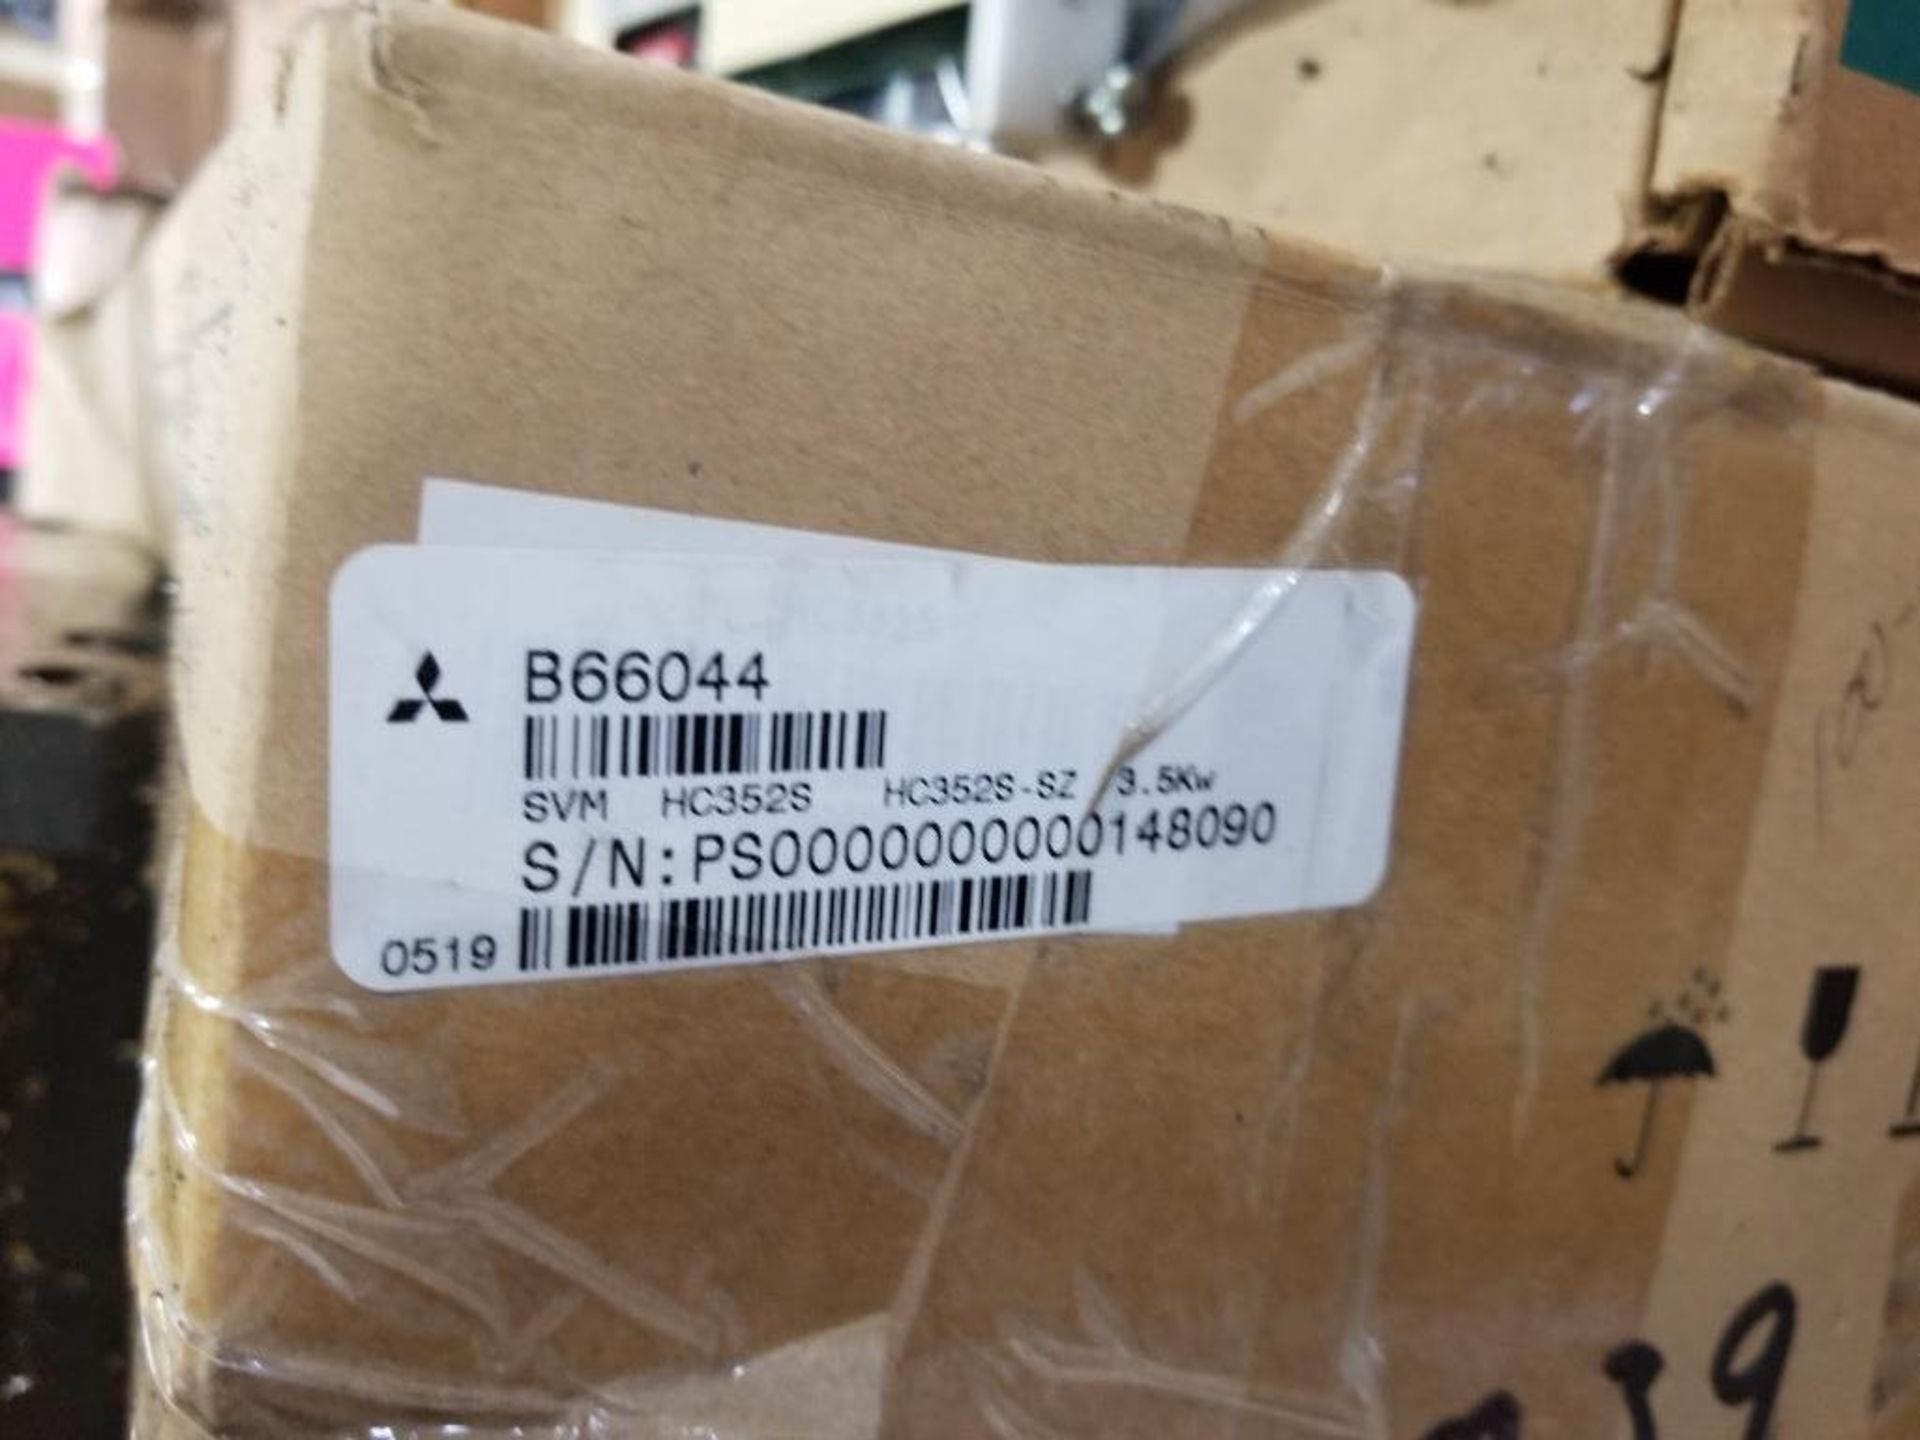 Mitsubishi HC-3525S servo motor. In box, but appears used. - Image 2 of 4